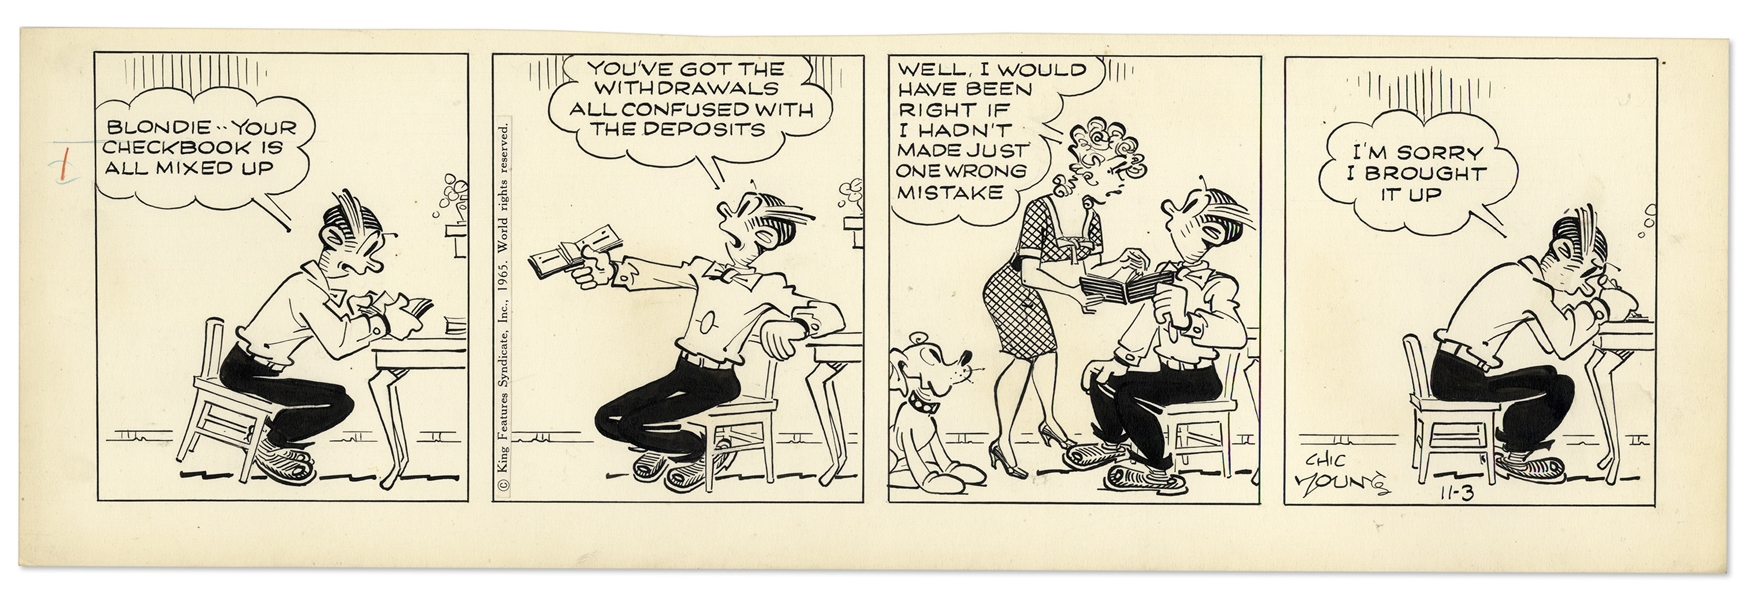 2 Chic Young Hand-Drawn ''Blondie'' Comic Strips From 1965 -- With Chic Young's Original Artwork for One